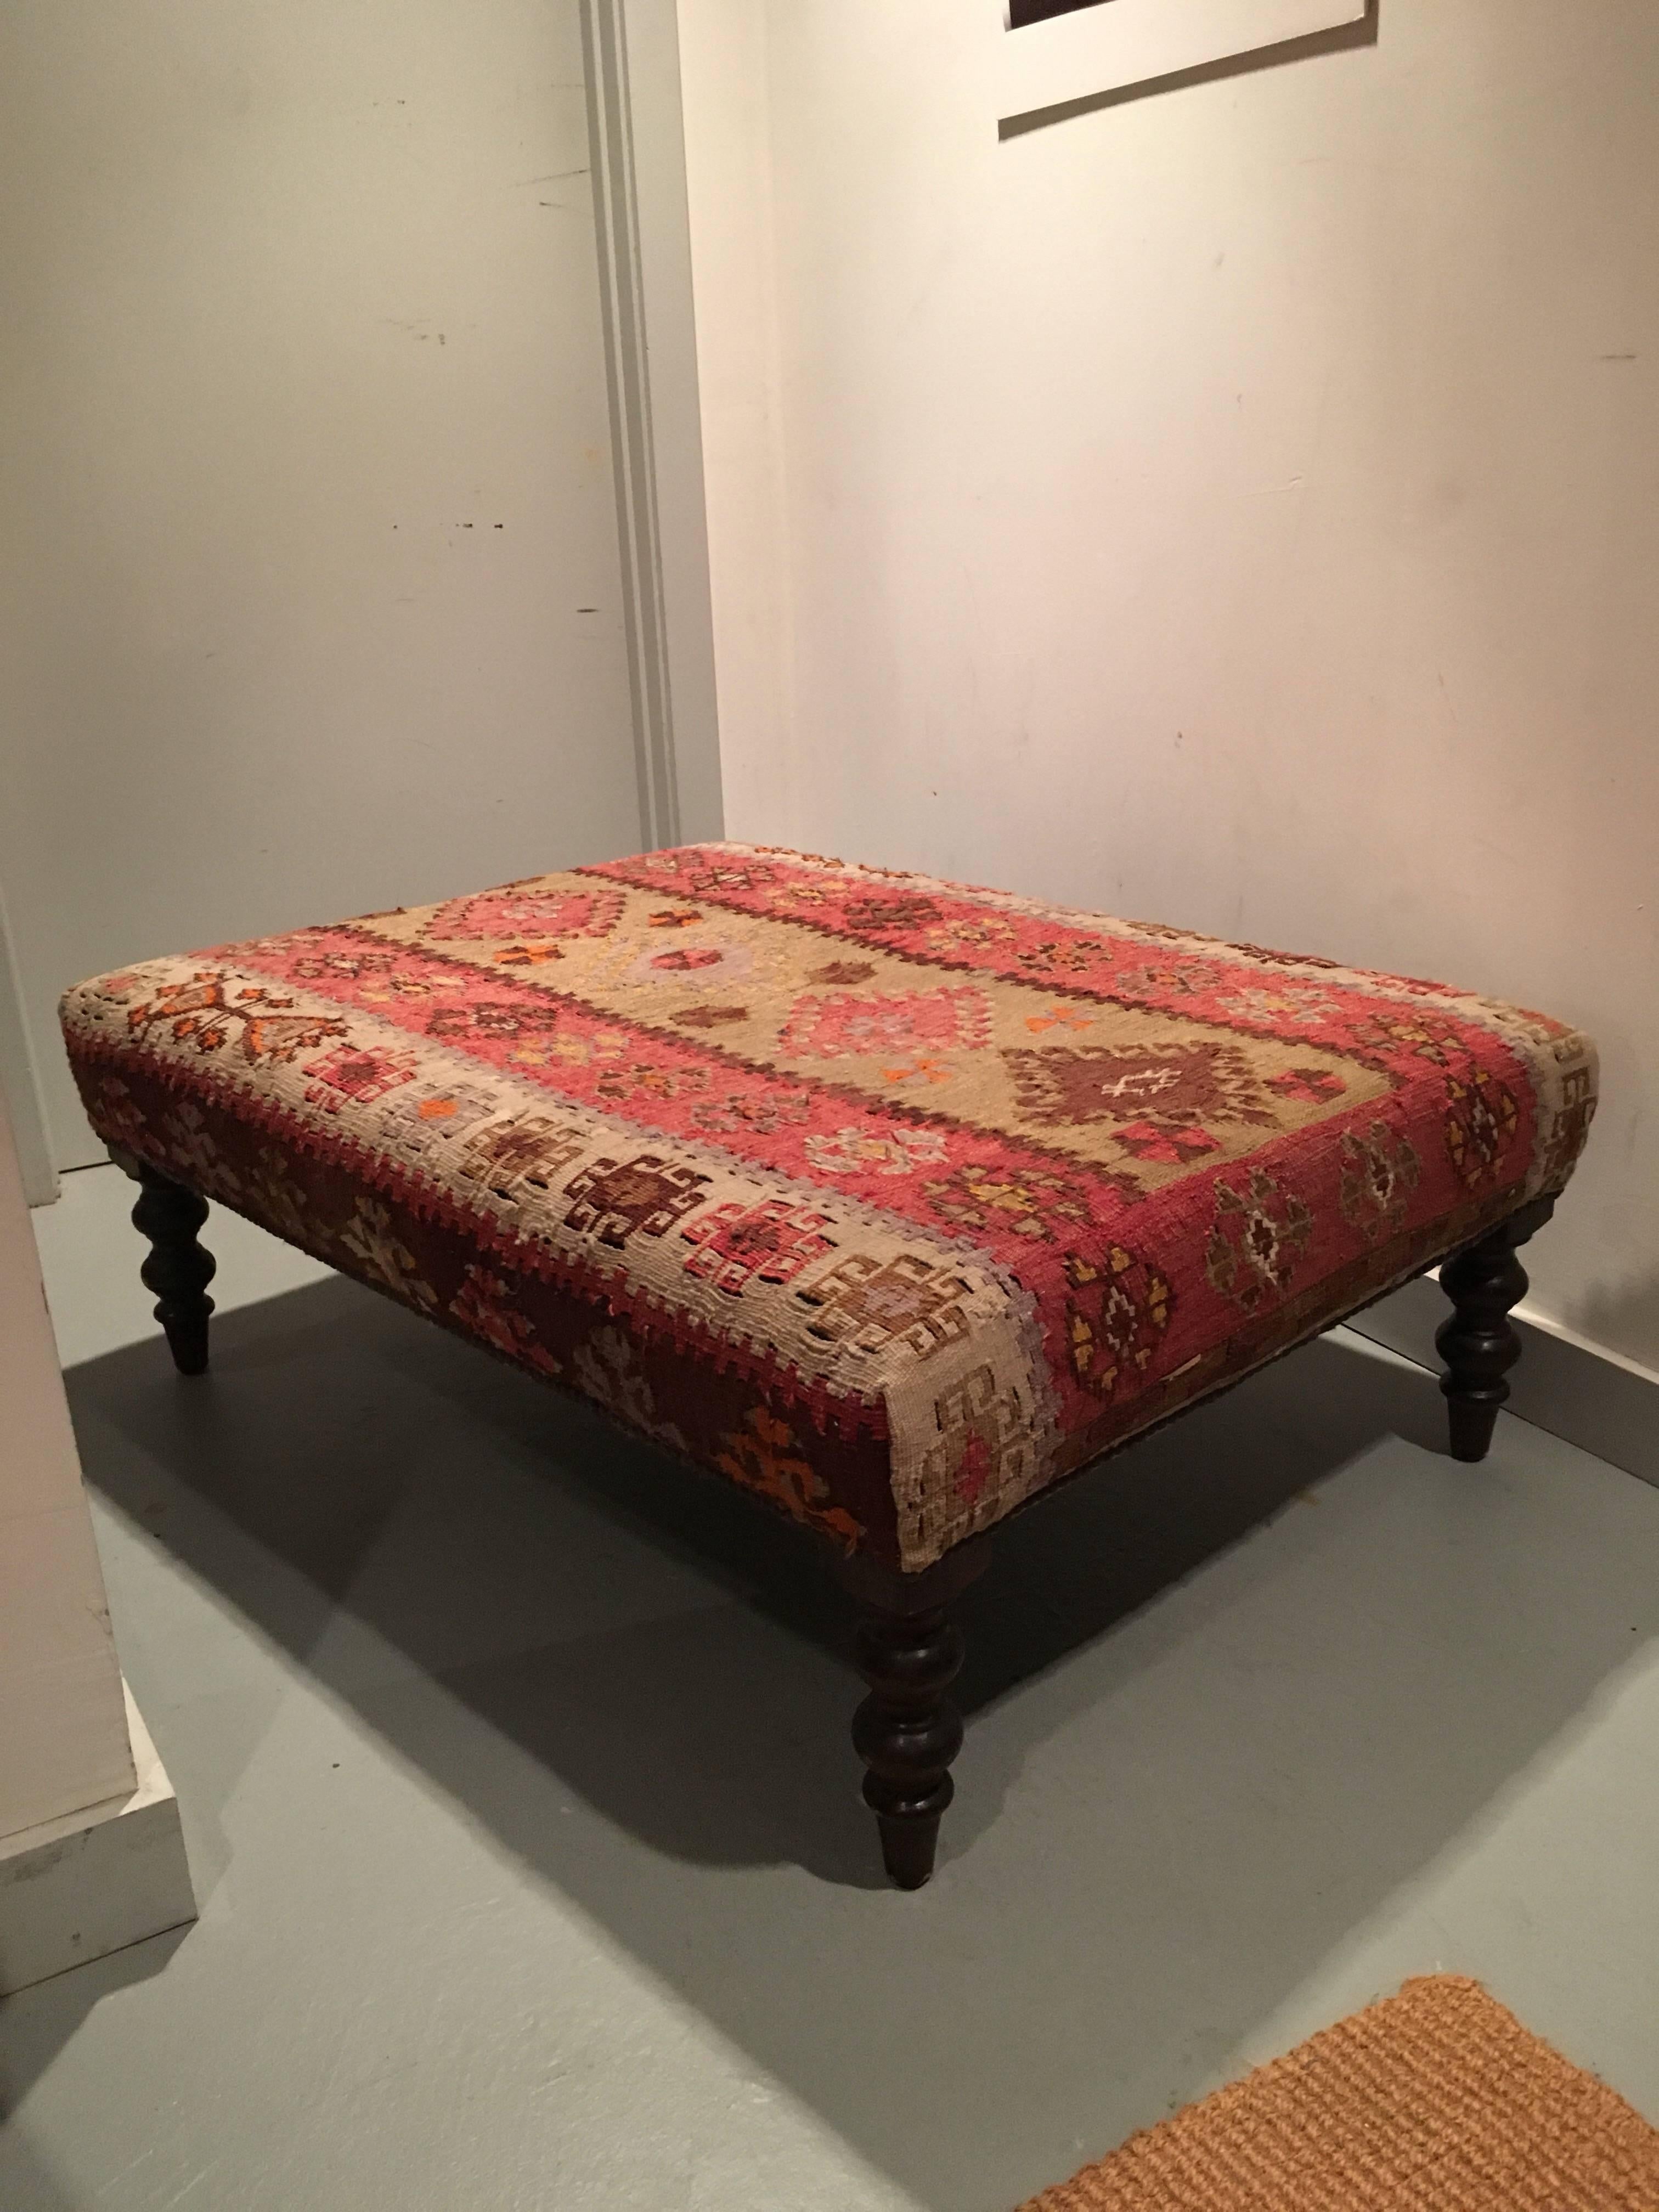 Kilim upholstered rectangular ottoman, thought to be purchased at George Smith 28 years ago, however, not marked. Brass nail heads applied around perimeter of ottoman sitting atop dark carved turned legs.

Excellent condition for age and use.

 